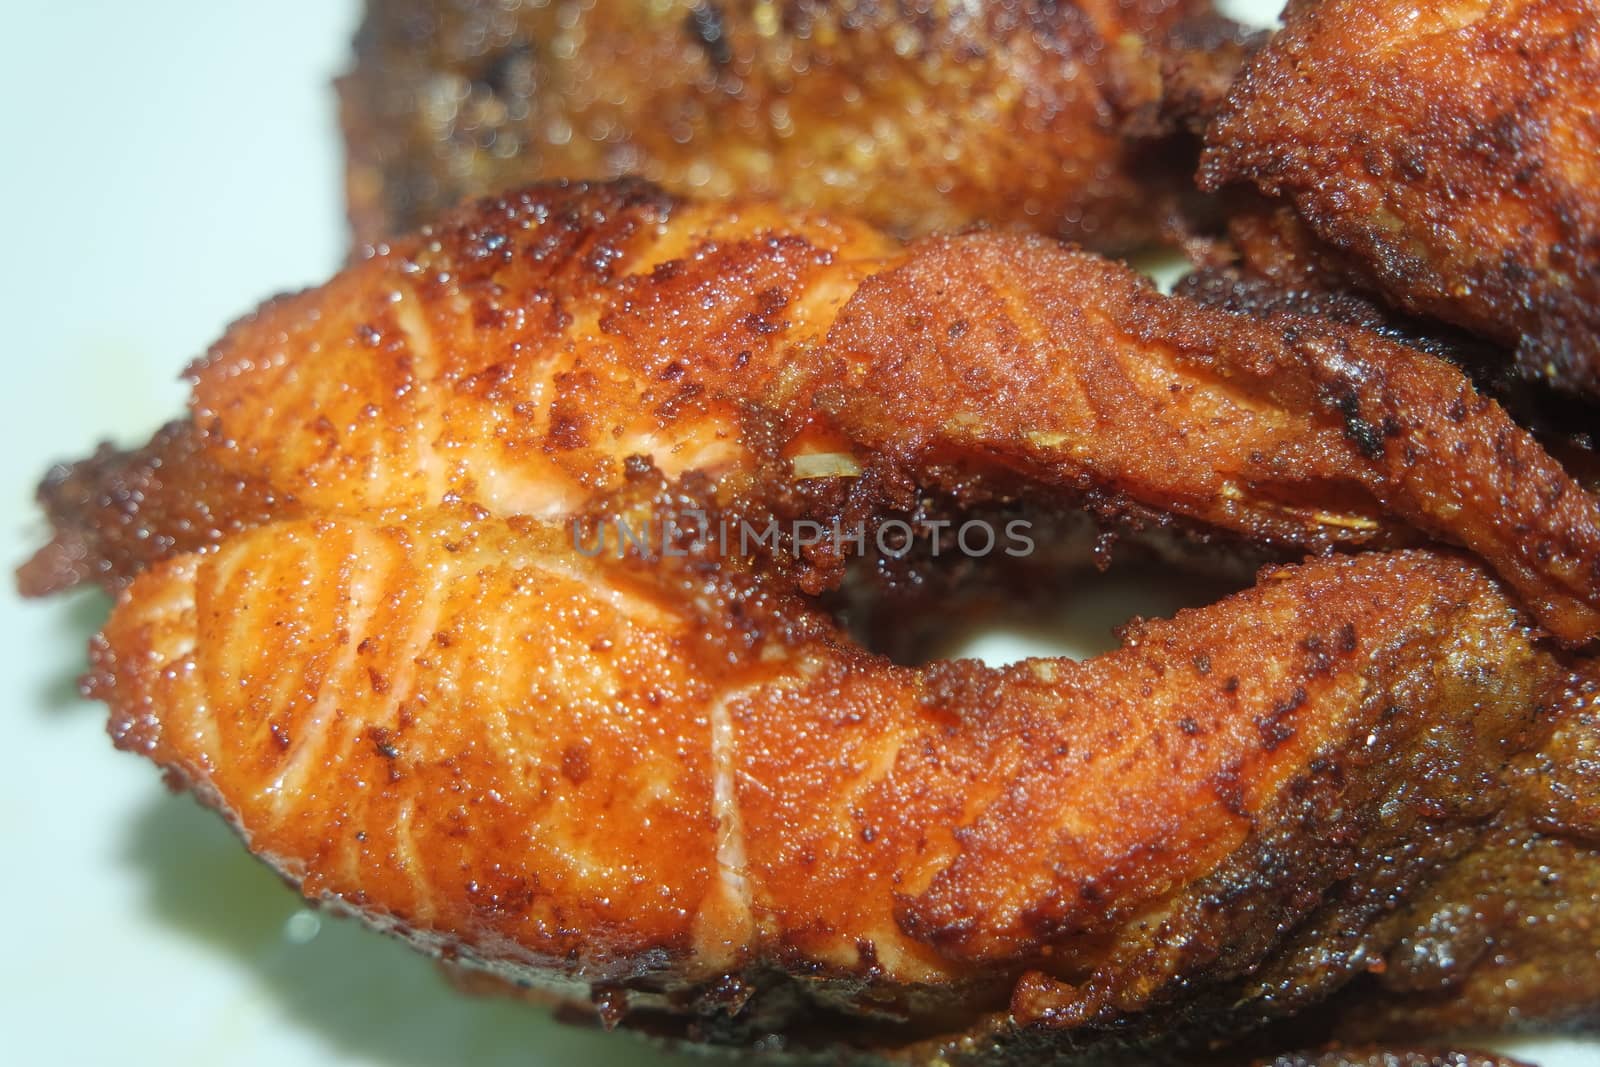 Spicy and crunchy barbecue of fried fish fillet on a white background. Homemade grilled trout fish steaks for health nourishments.